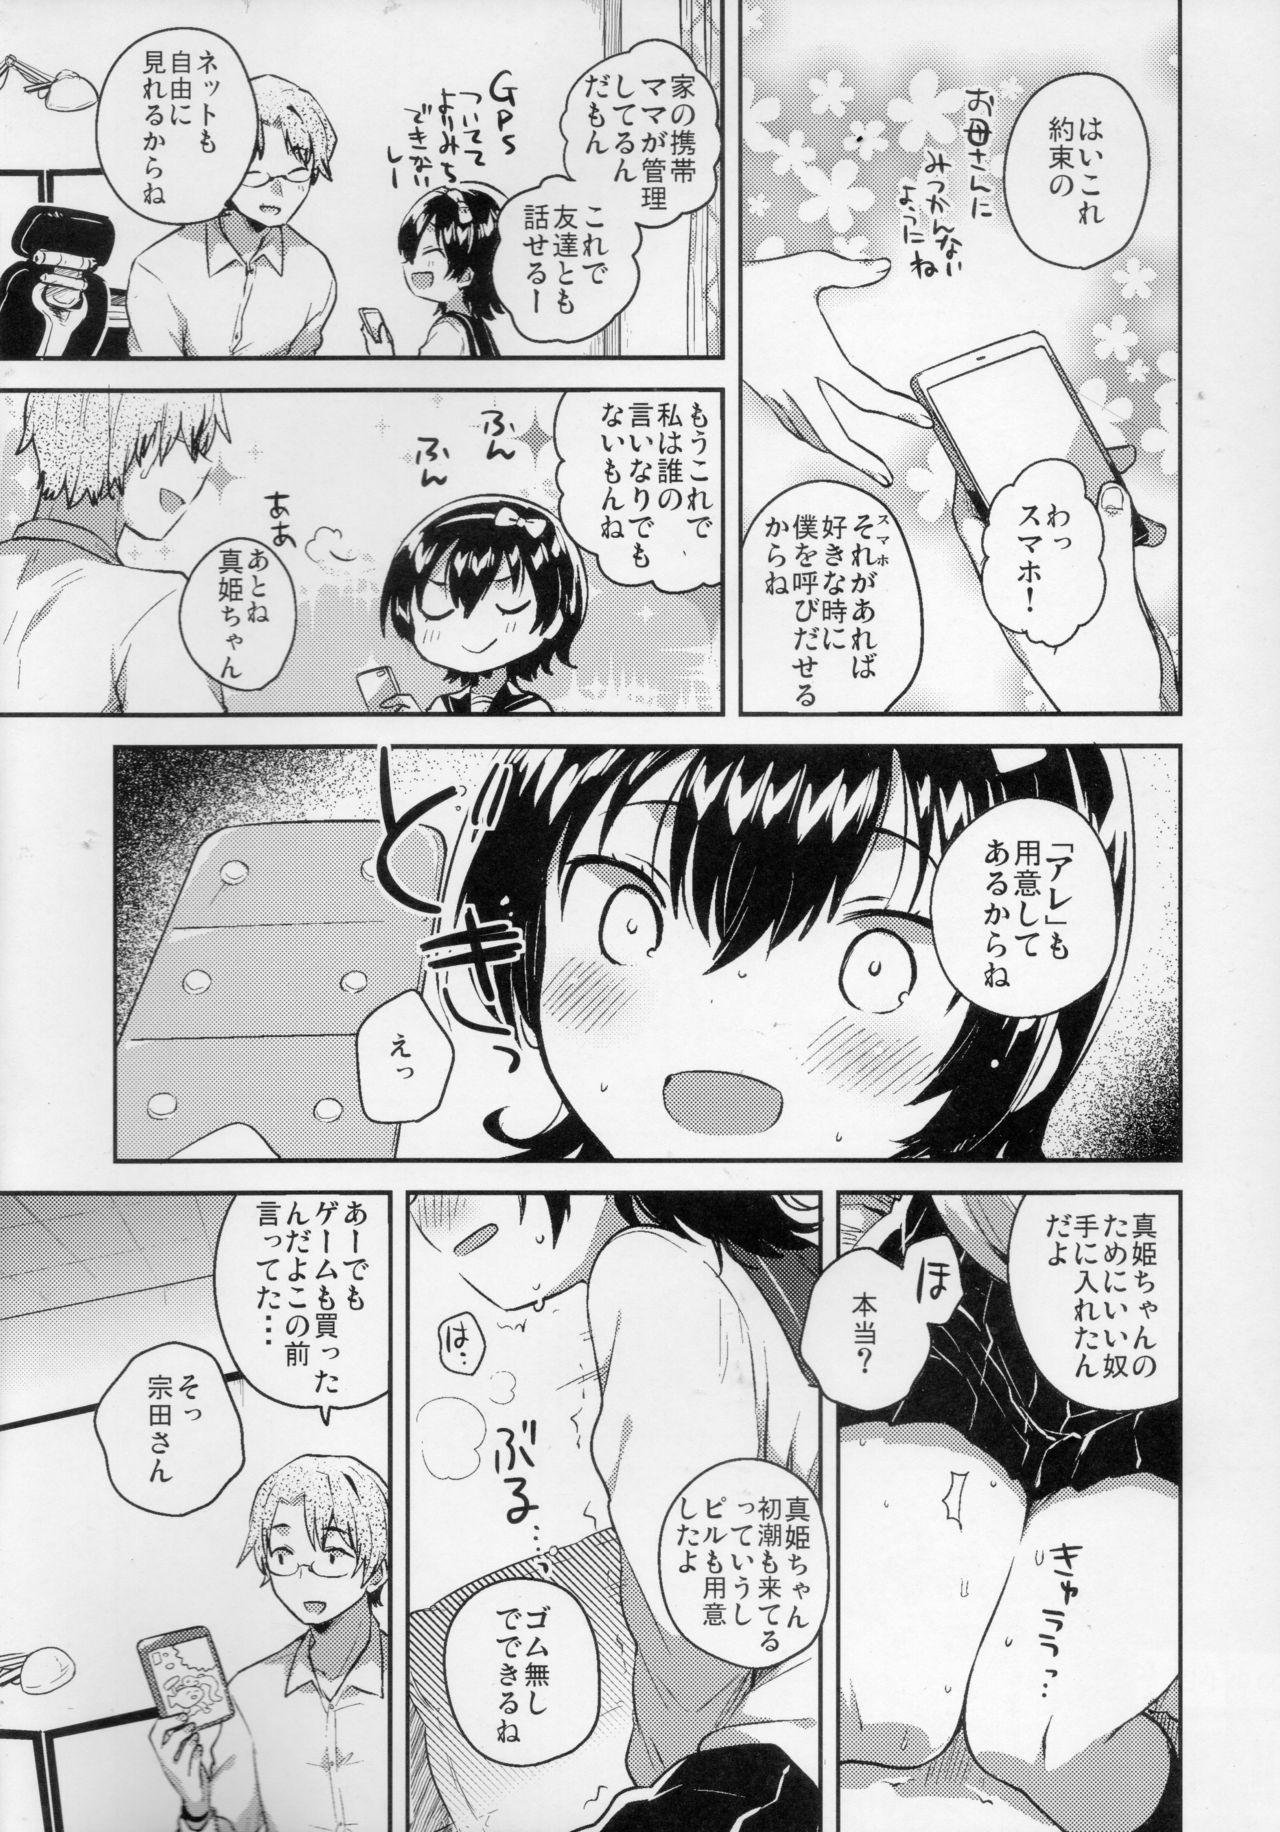 Show Anoko wa Marionette - She Is marionette - Original Facials - Page 7